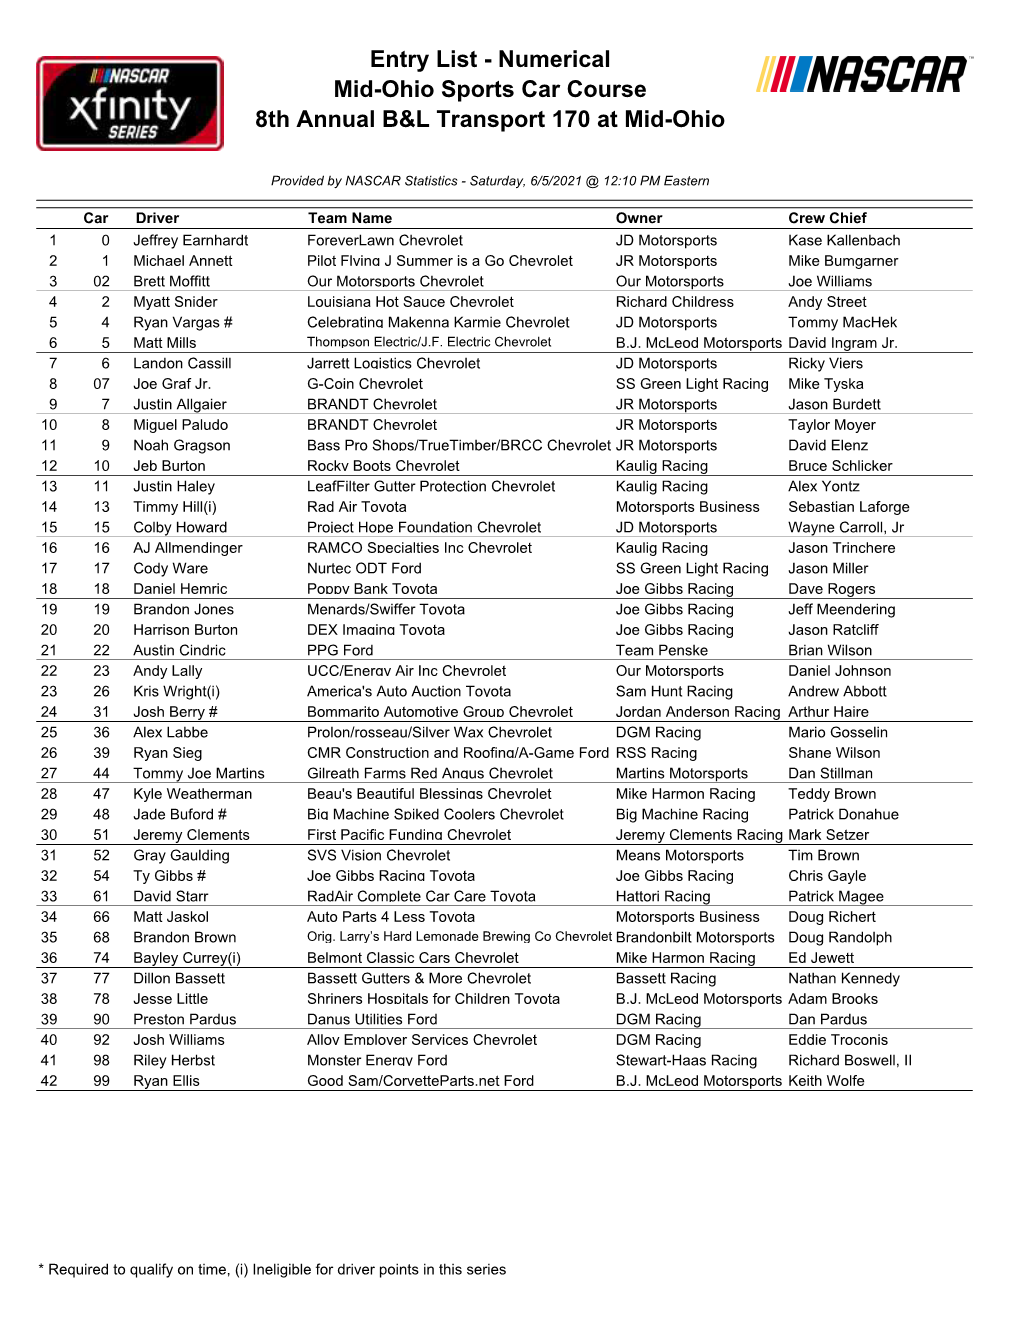 Entry List - Numerical Mid-Ohio Sports Car Course 8Th Annual B&L Transport 170 at Mid-Ohio